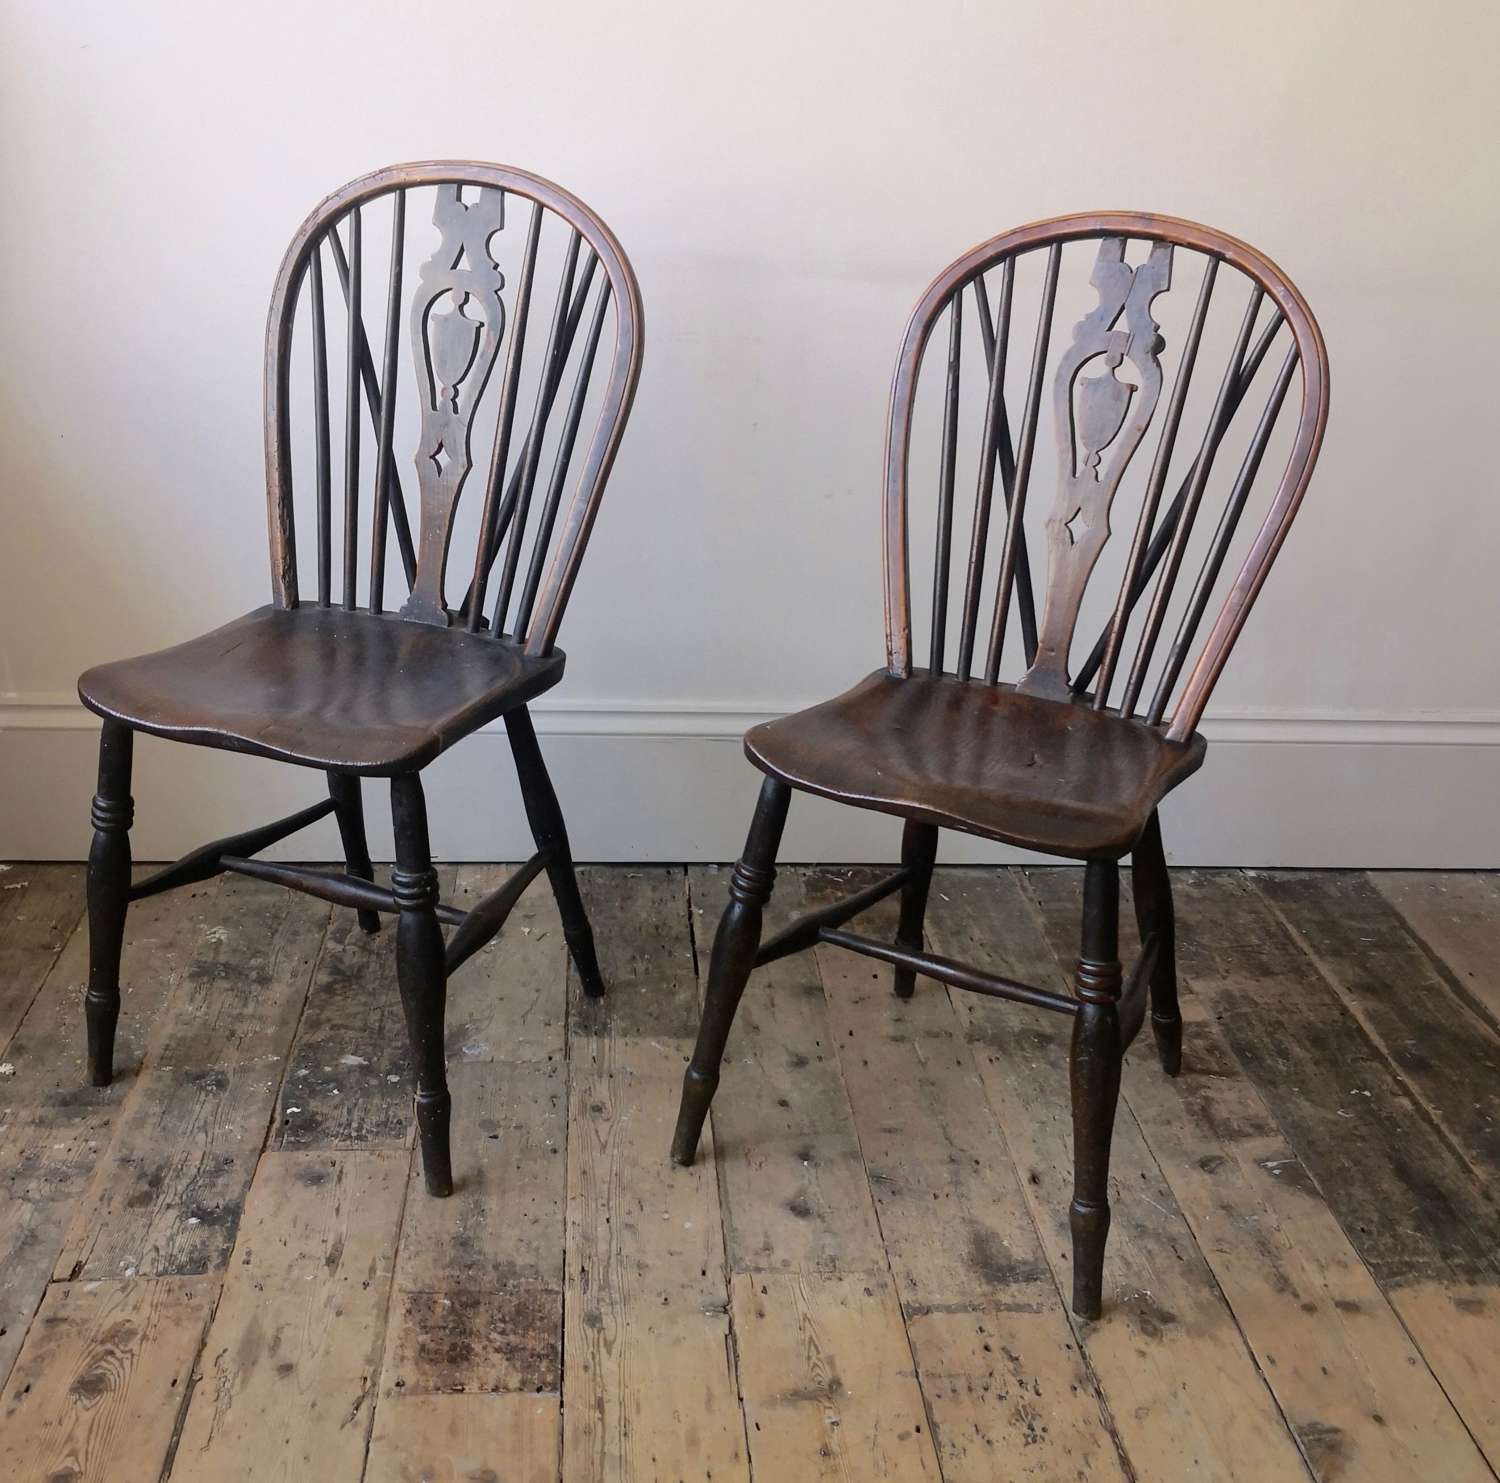 A pair of 19th century Windsor chairs